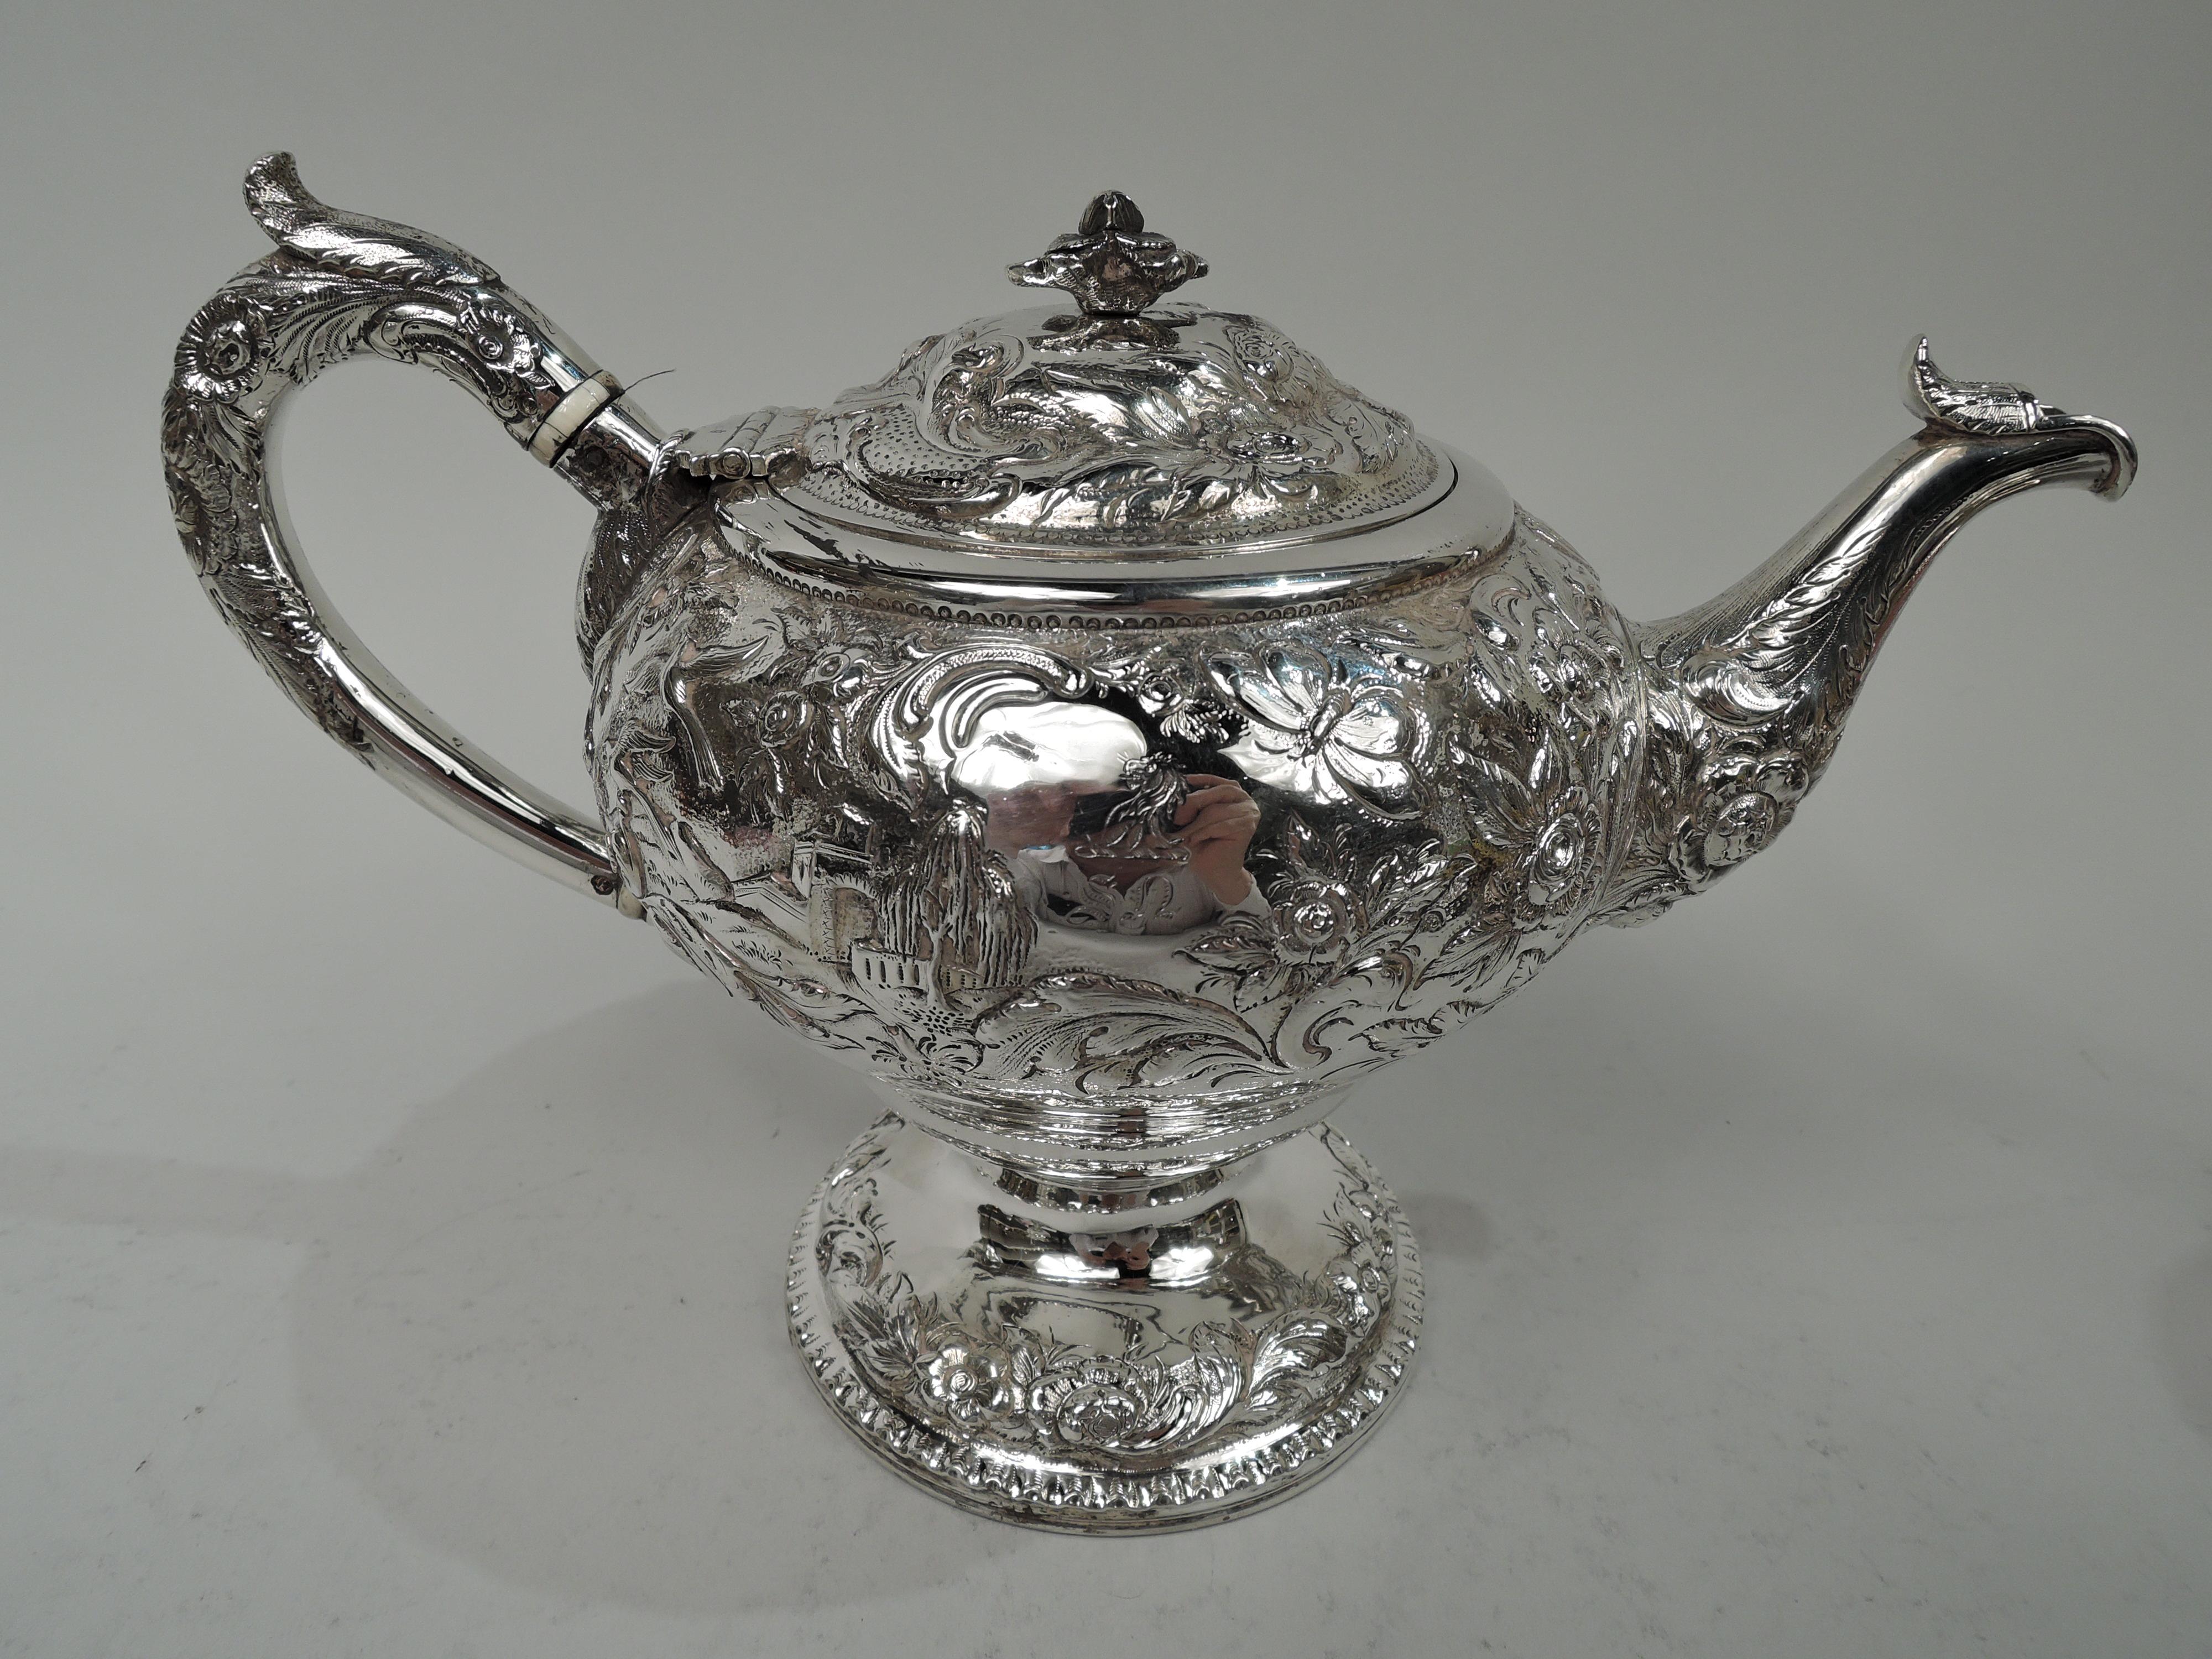 Classical silver teapot. Made by Samuel Kirk in Baltimore in 1828. Ovoid with leaf-capped high-looping handle and leaf-capped tapering spout. Cover hinged and domed with flower finial. Foot domed. Picturesque Classical ruins and hilltop turrets and